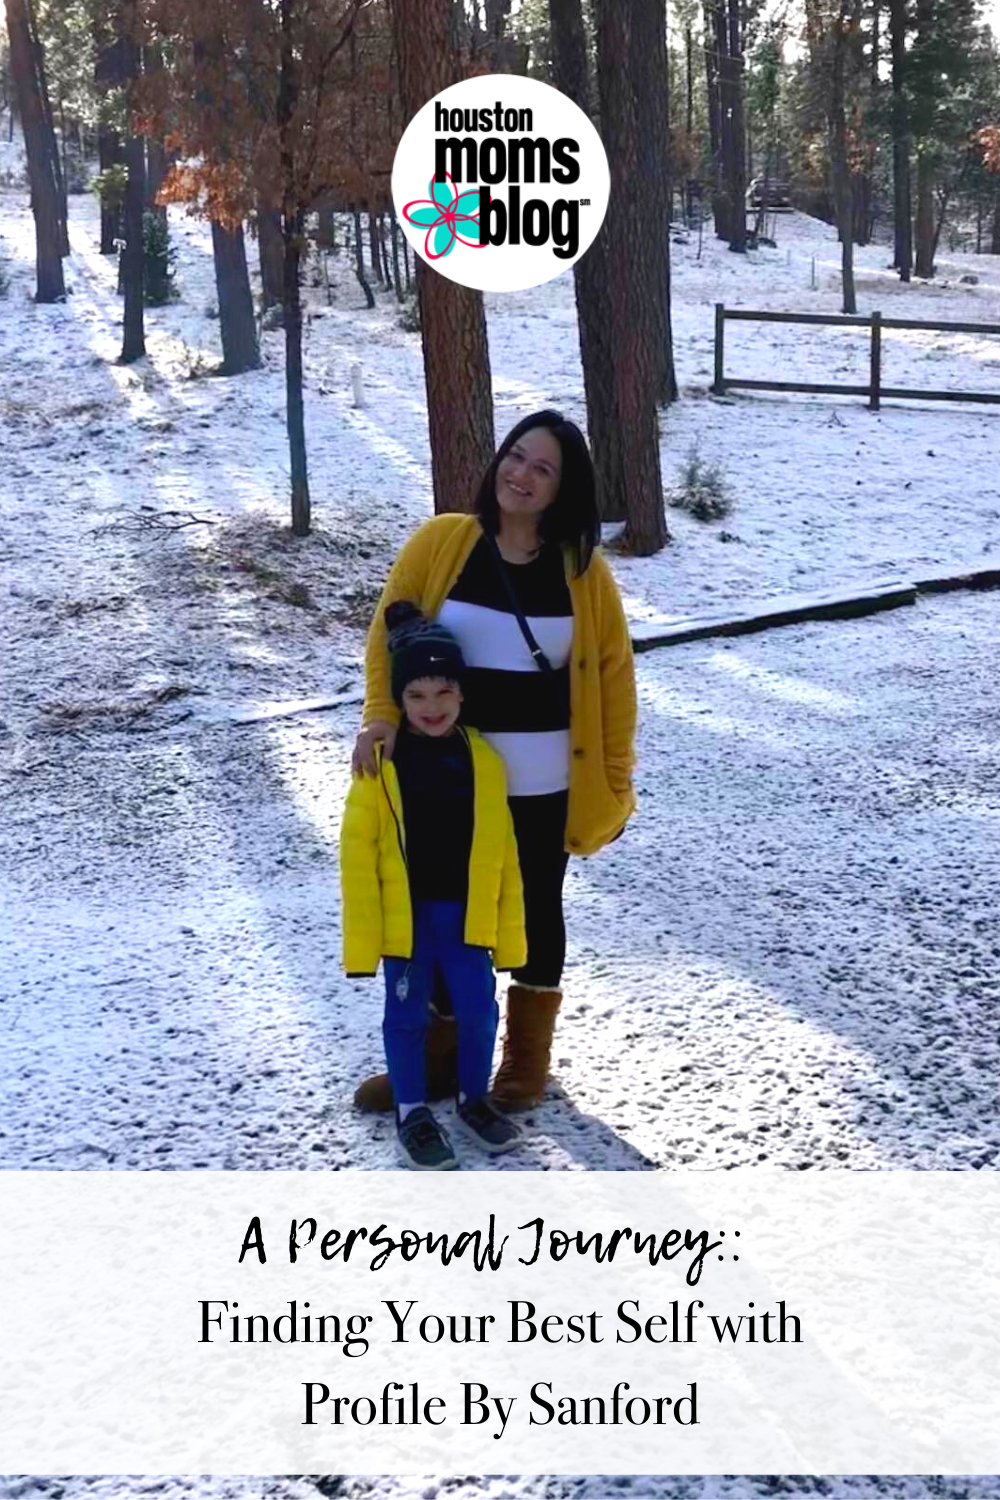 Houston Moms Blog “A Personal Journey:: Finding Your Best Self with Profile By Sanford” #momsaroundhouston #houstonmomsblog